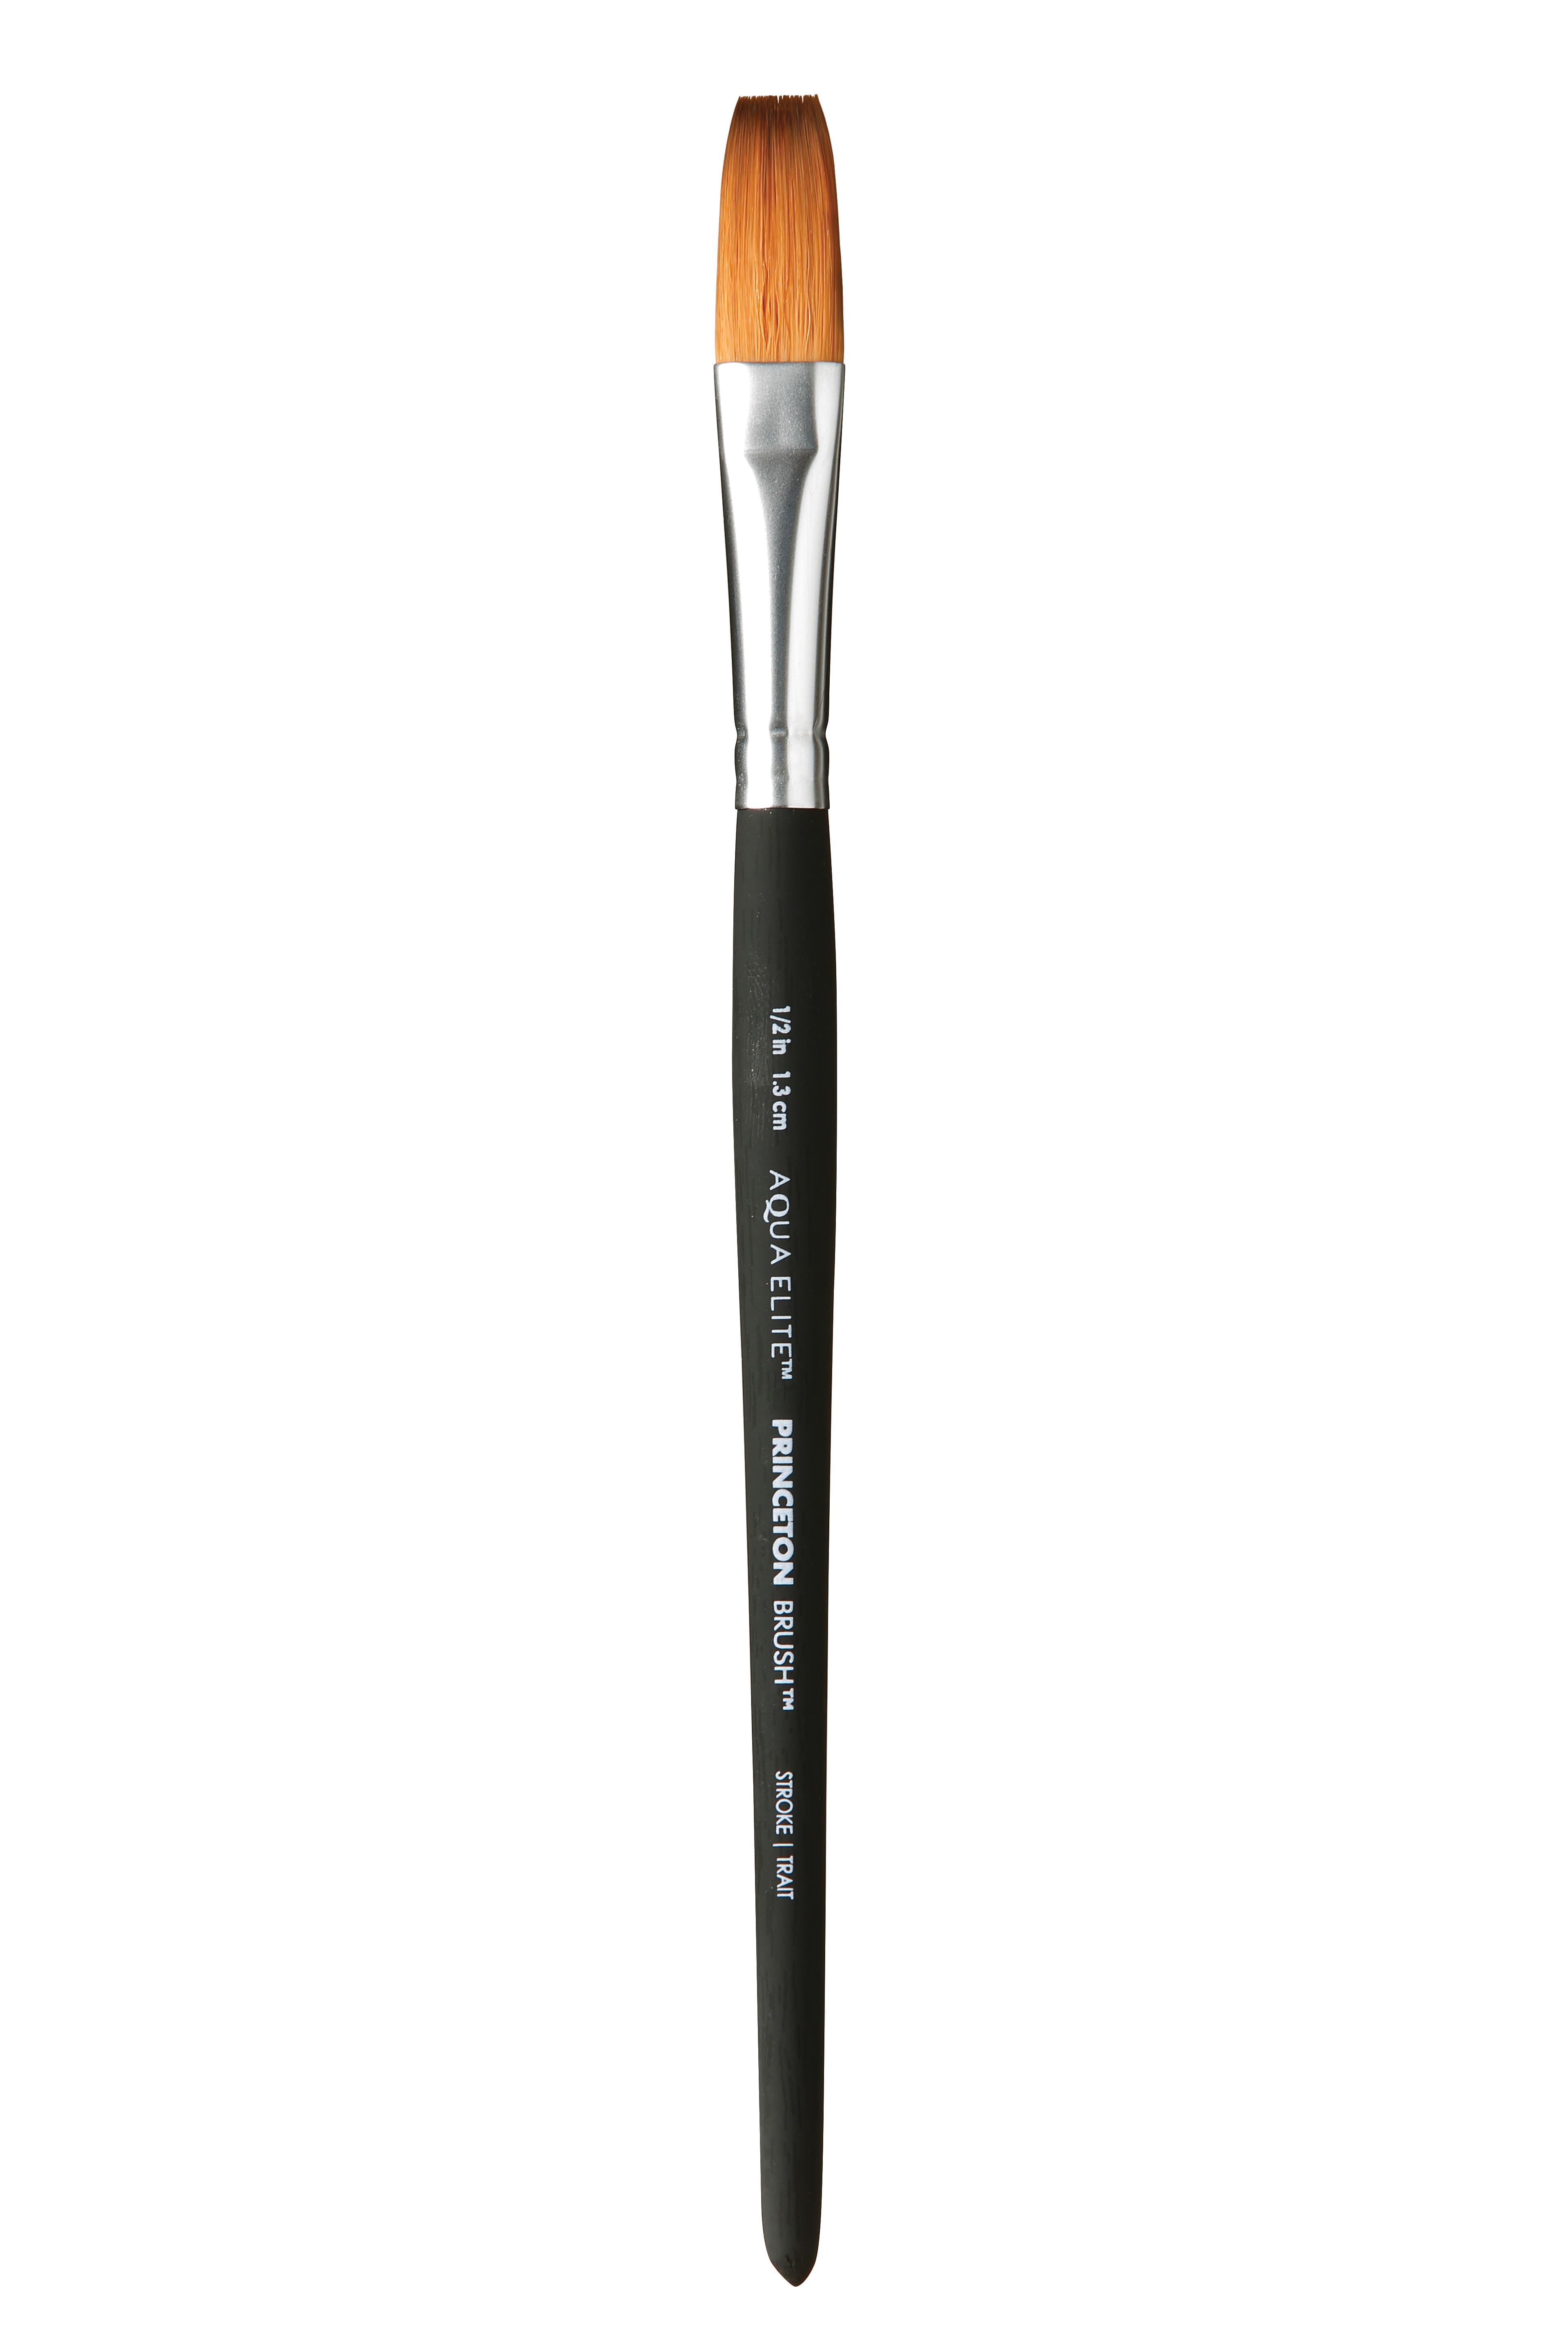 Princeton Aqua Elite Series 4850 Synthetic Brushes and Sets